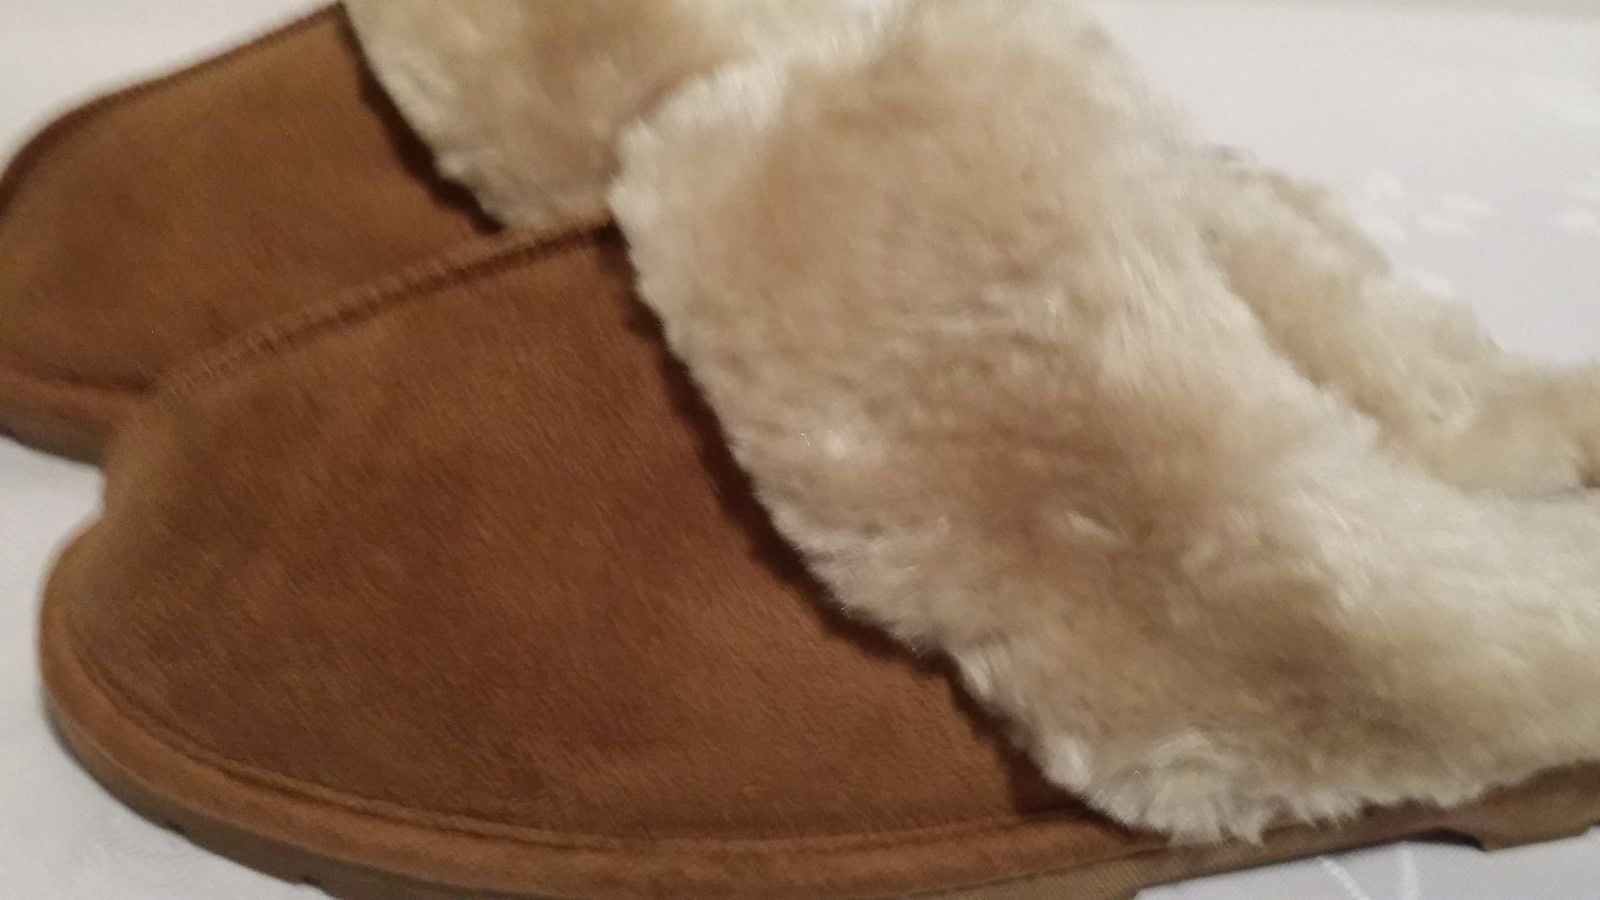 large womens slippers